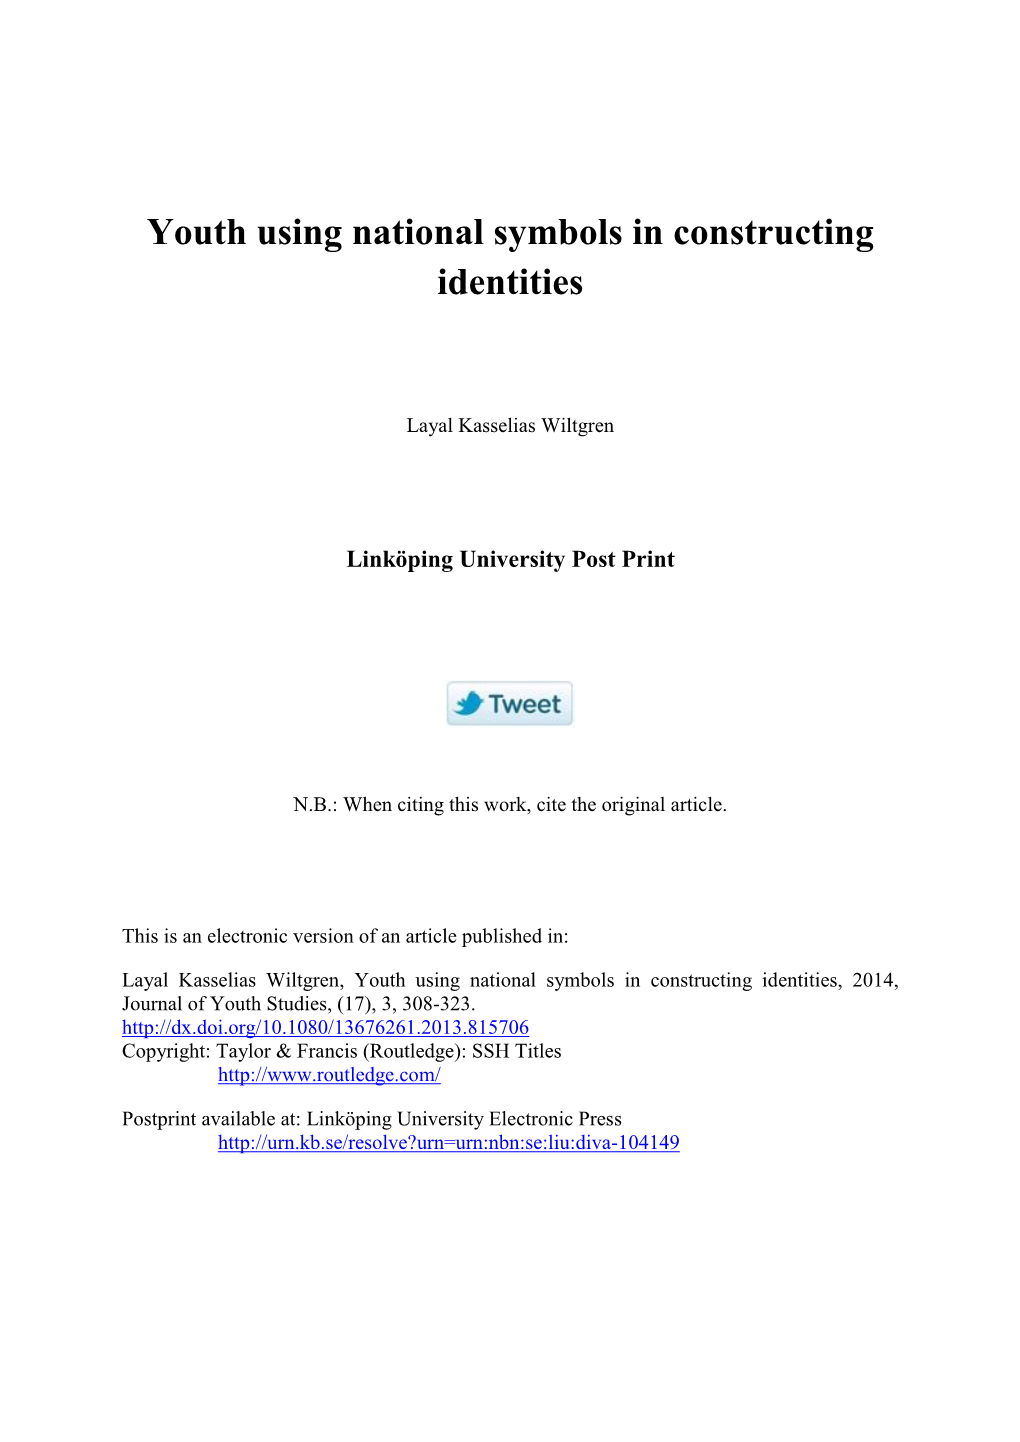 Youth Using National Symbols in Constructing Identities